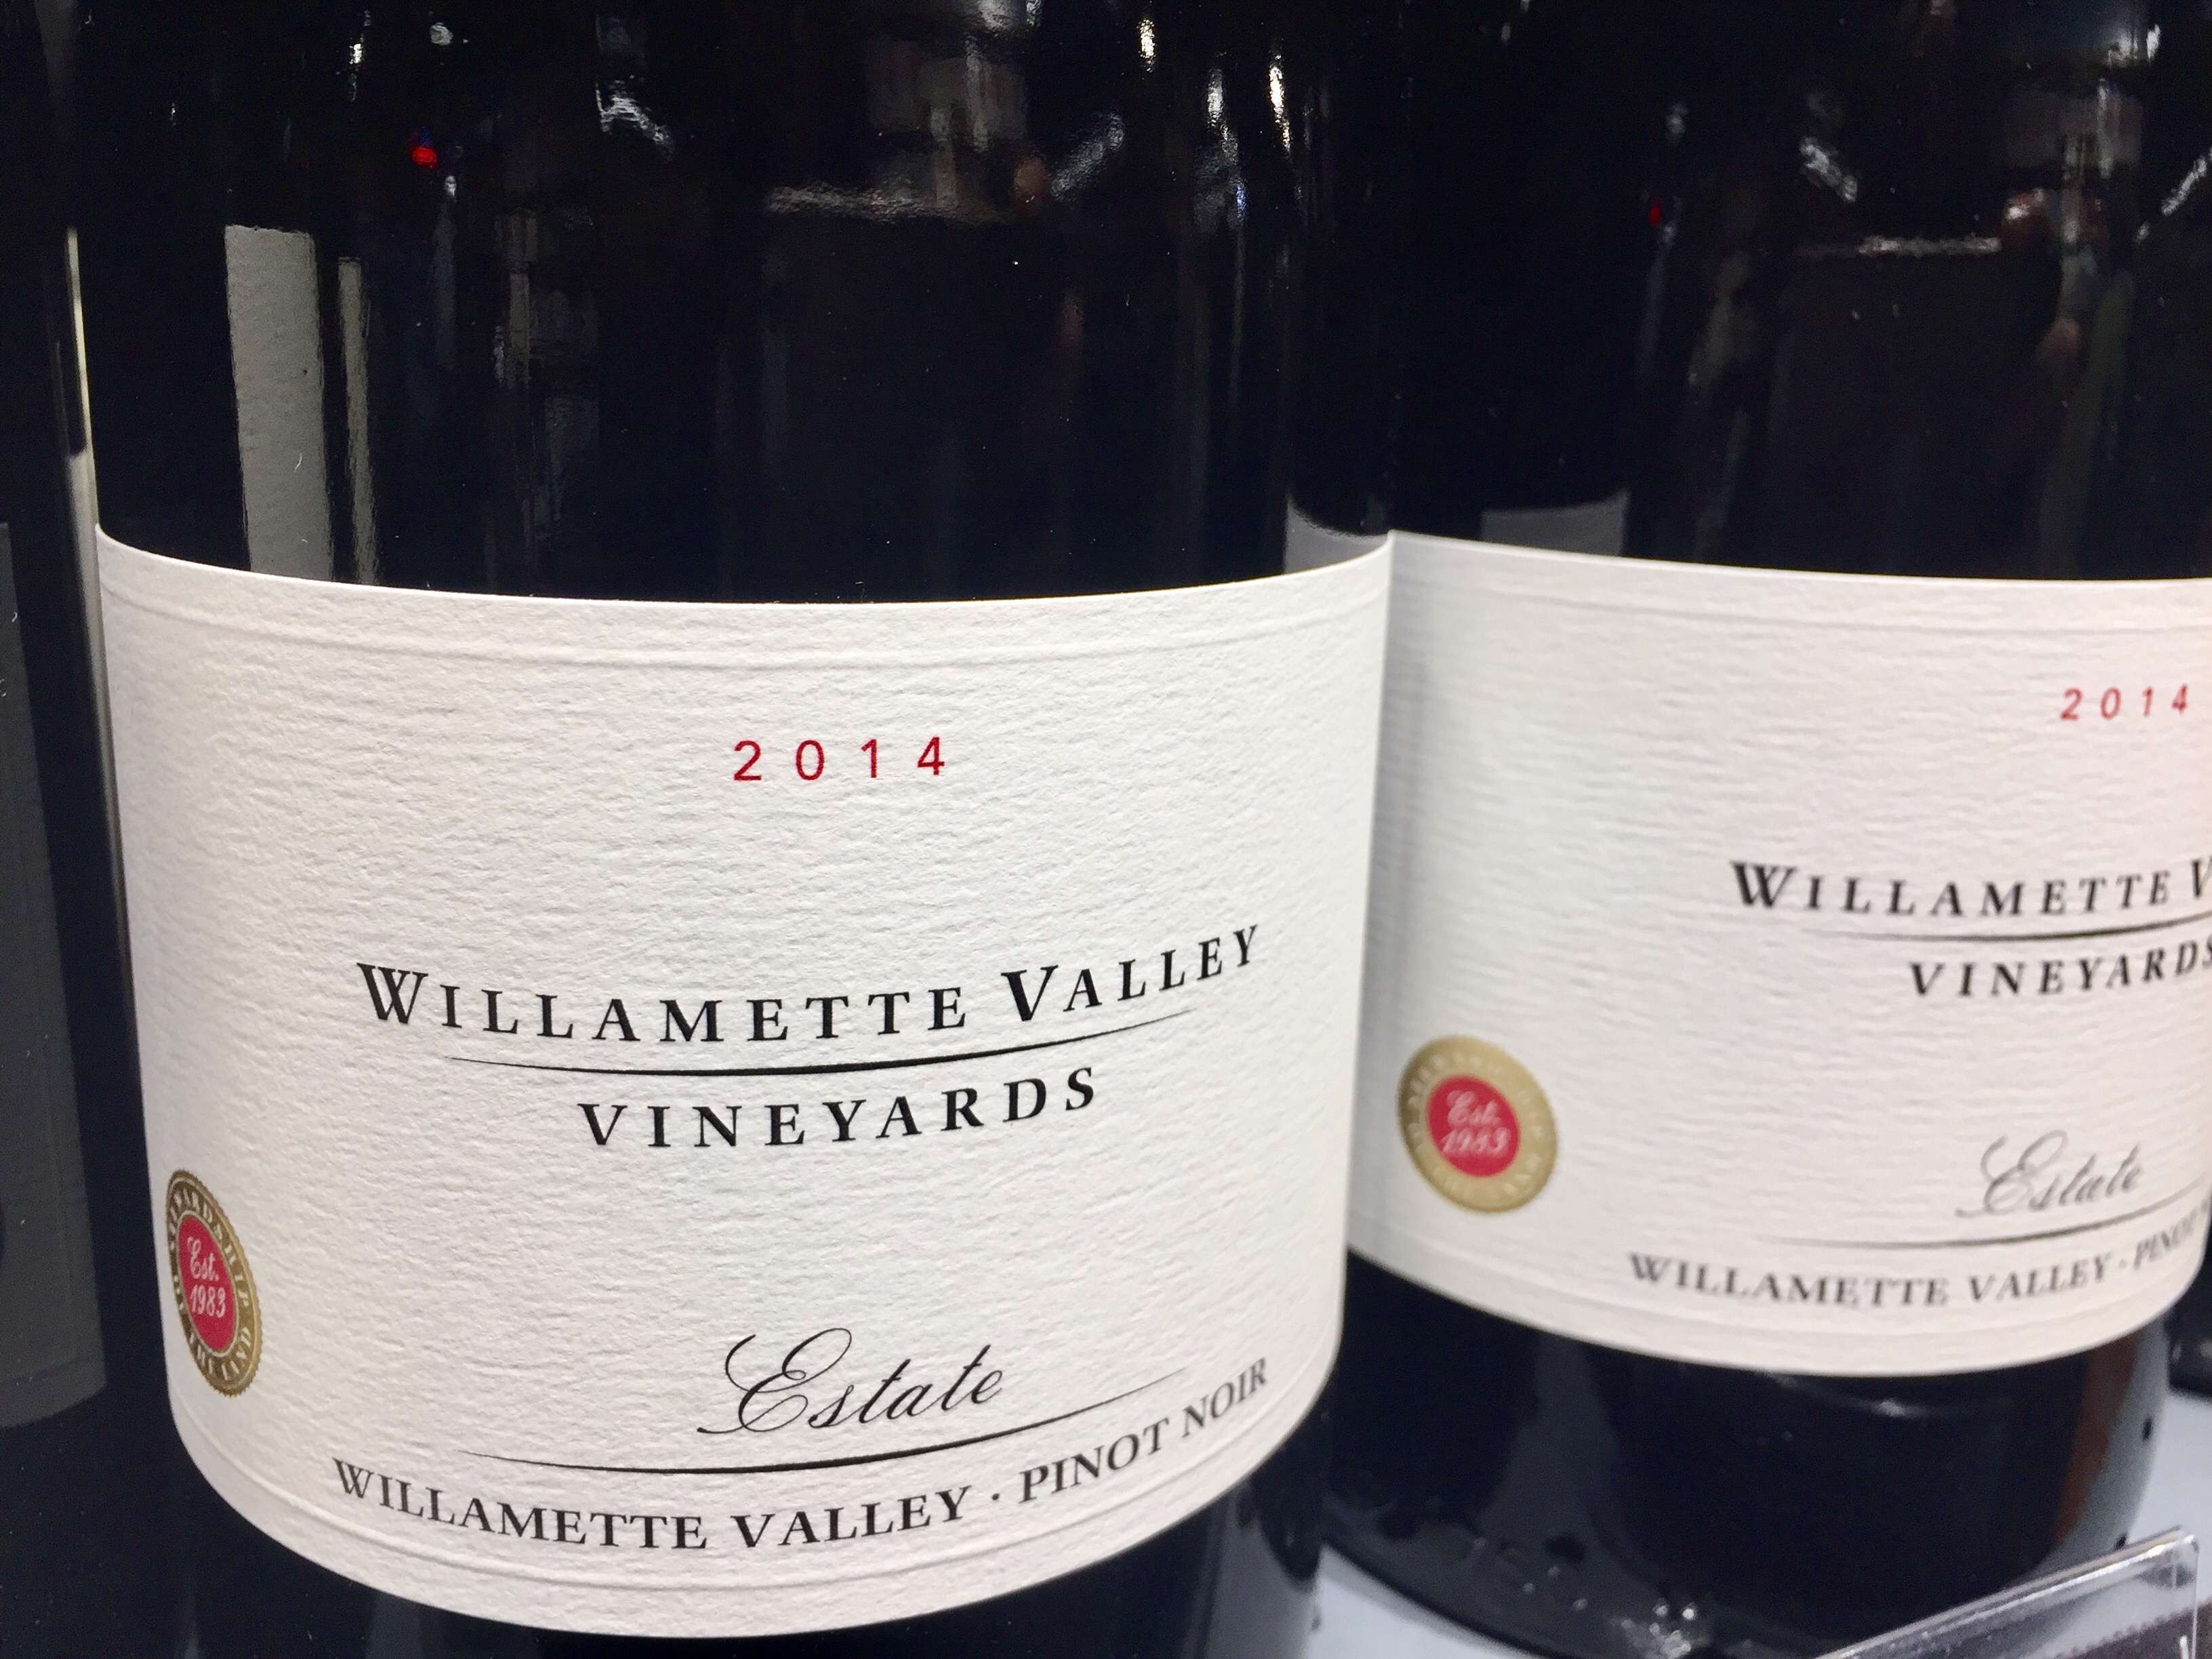 How to Pronounce Willamette Valley Correctly